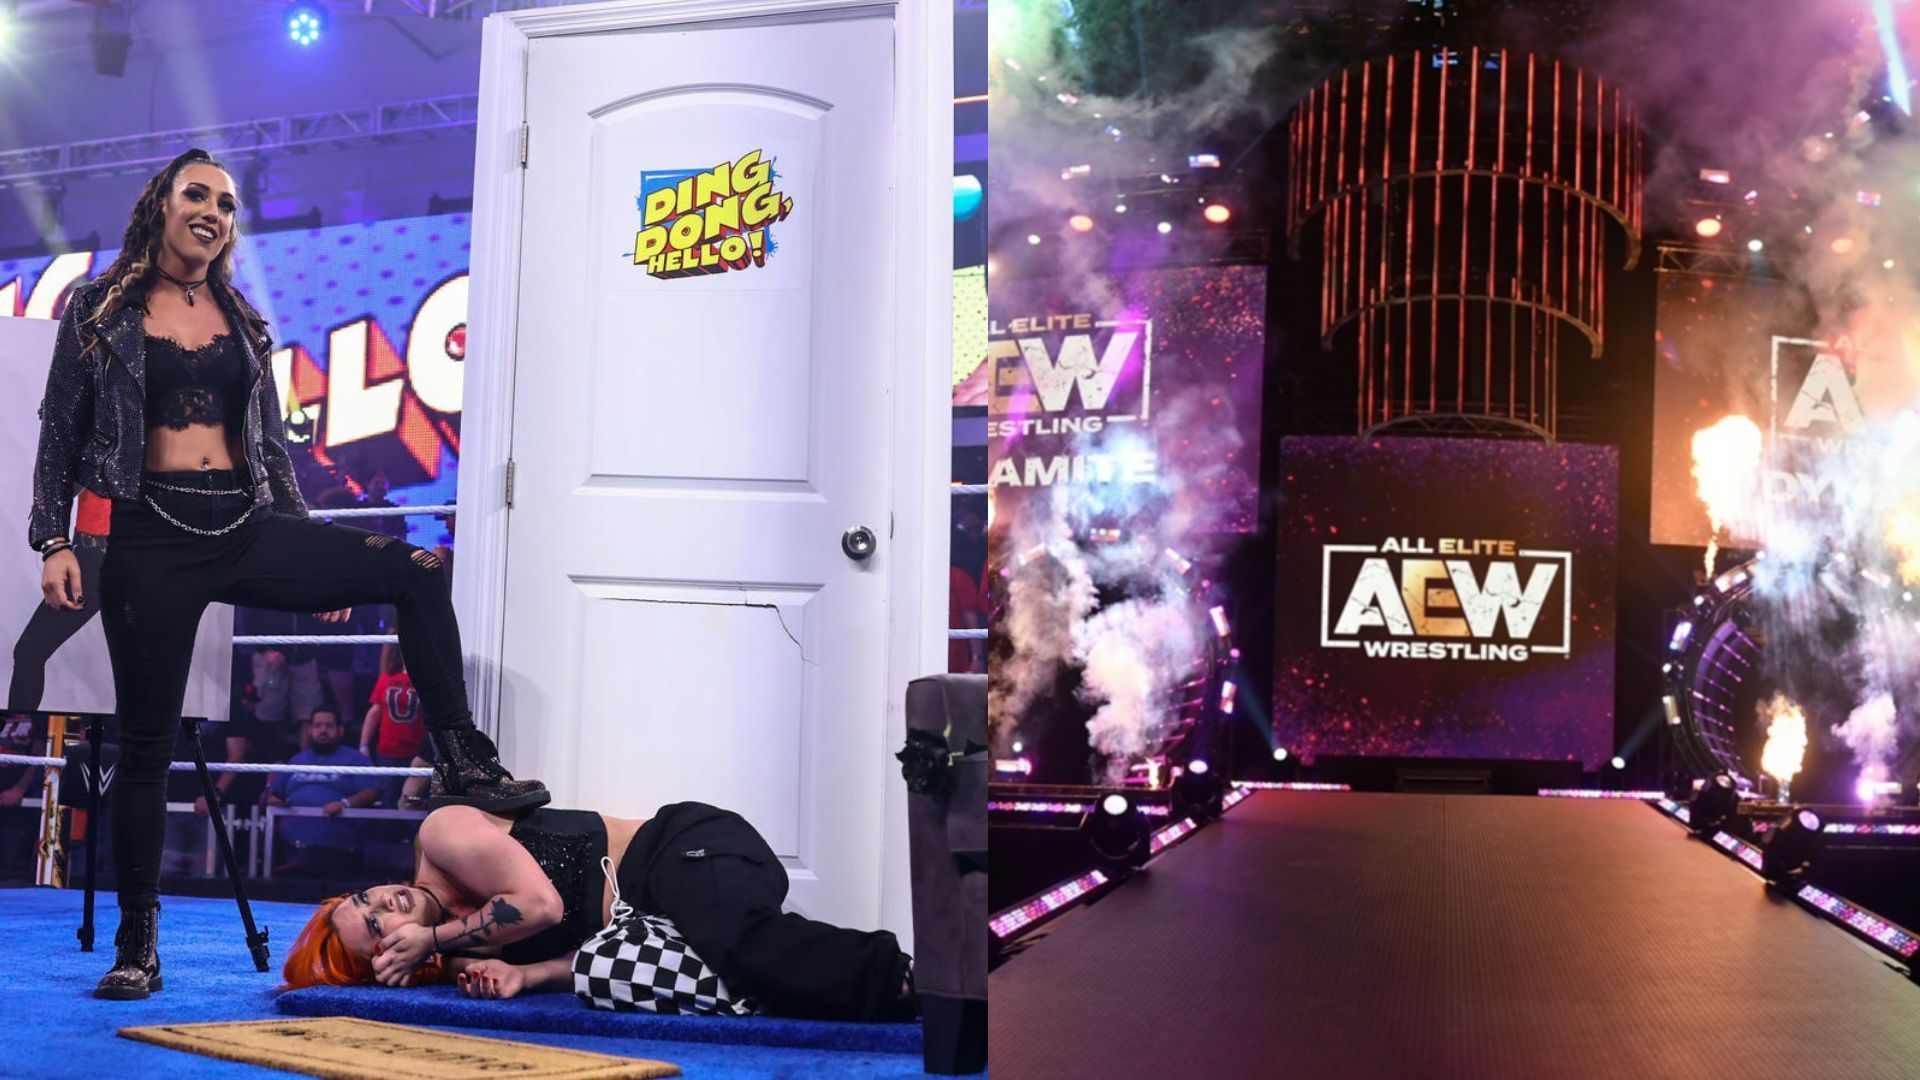 Jacy Jayne received a message from a current AEW personality